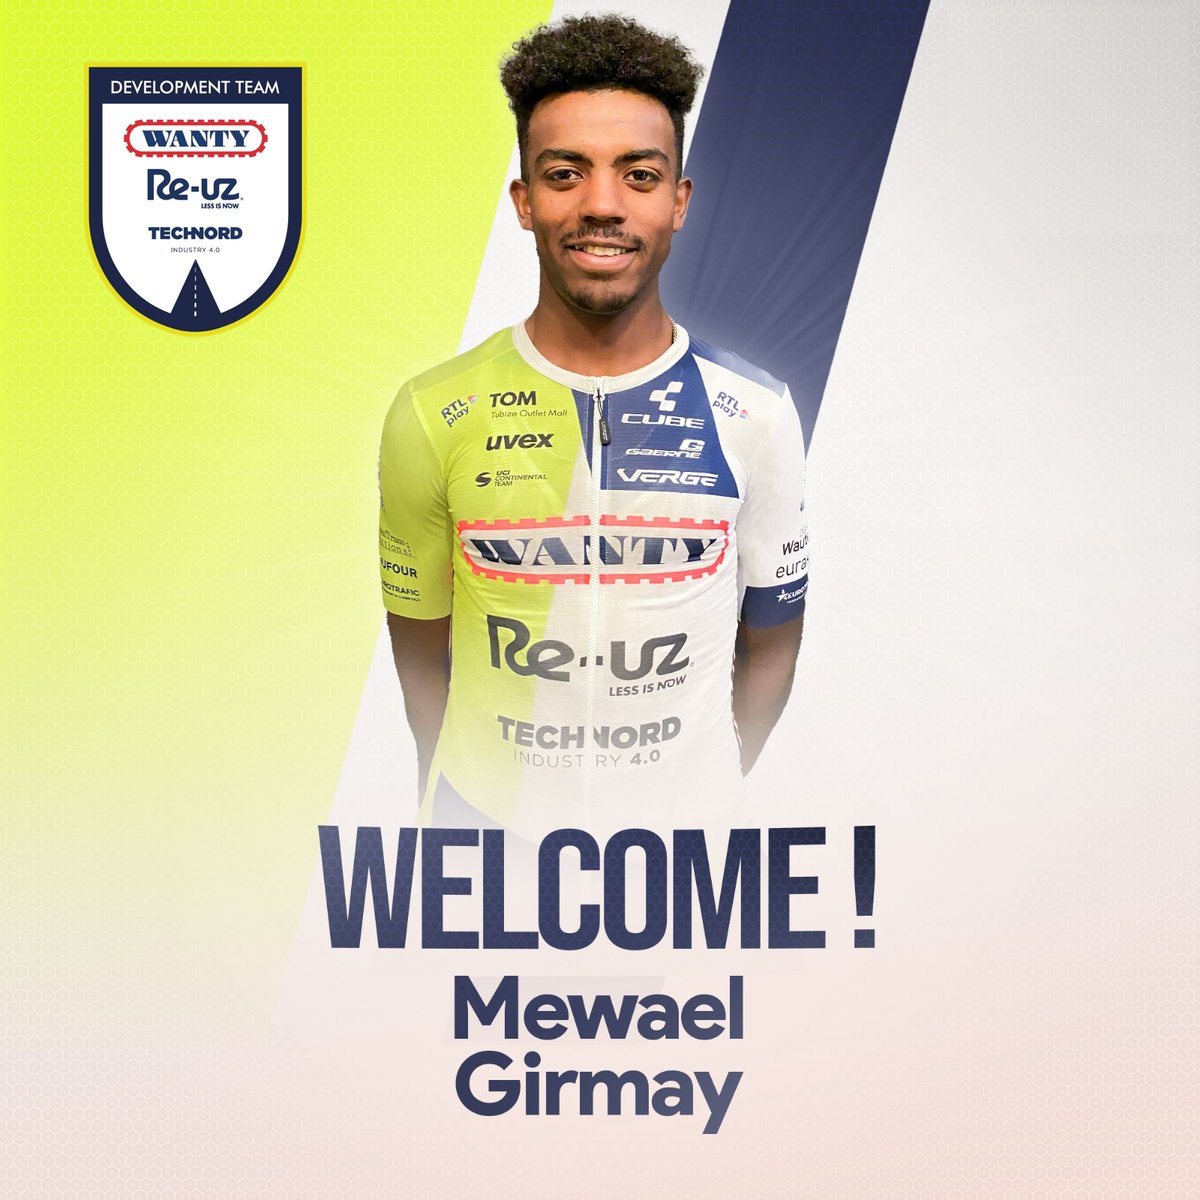 Welcome, Mewael Girmay! 🇪🇷 Wanty-ReUz-Technord welcomes another promising African talent with the 18-year-old from Eritrea 🤩 Learn more about Mewael ➡️ intermarche-wanty.eu/news/mewael-gi…